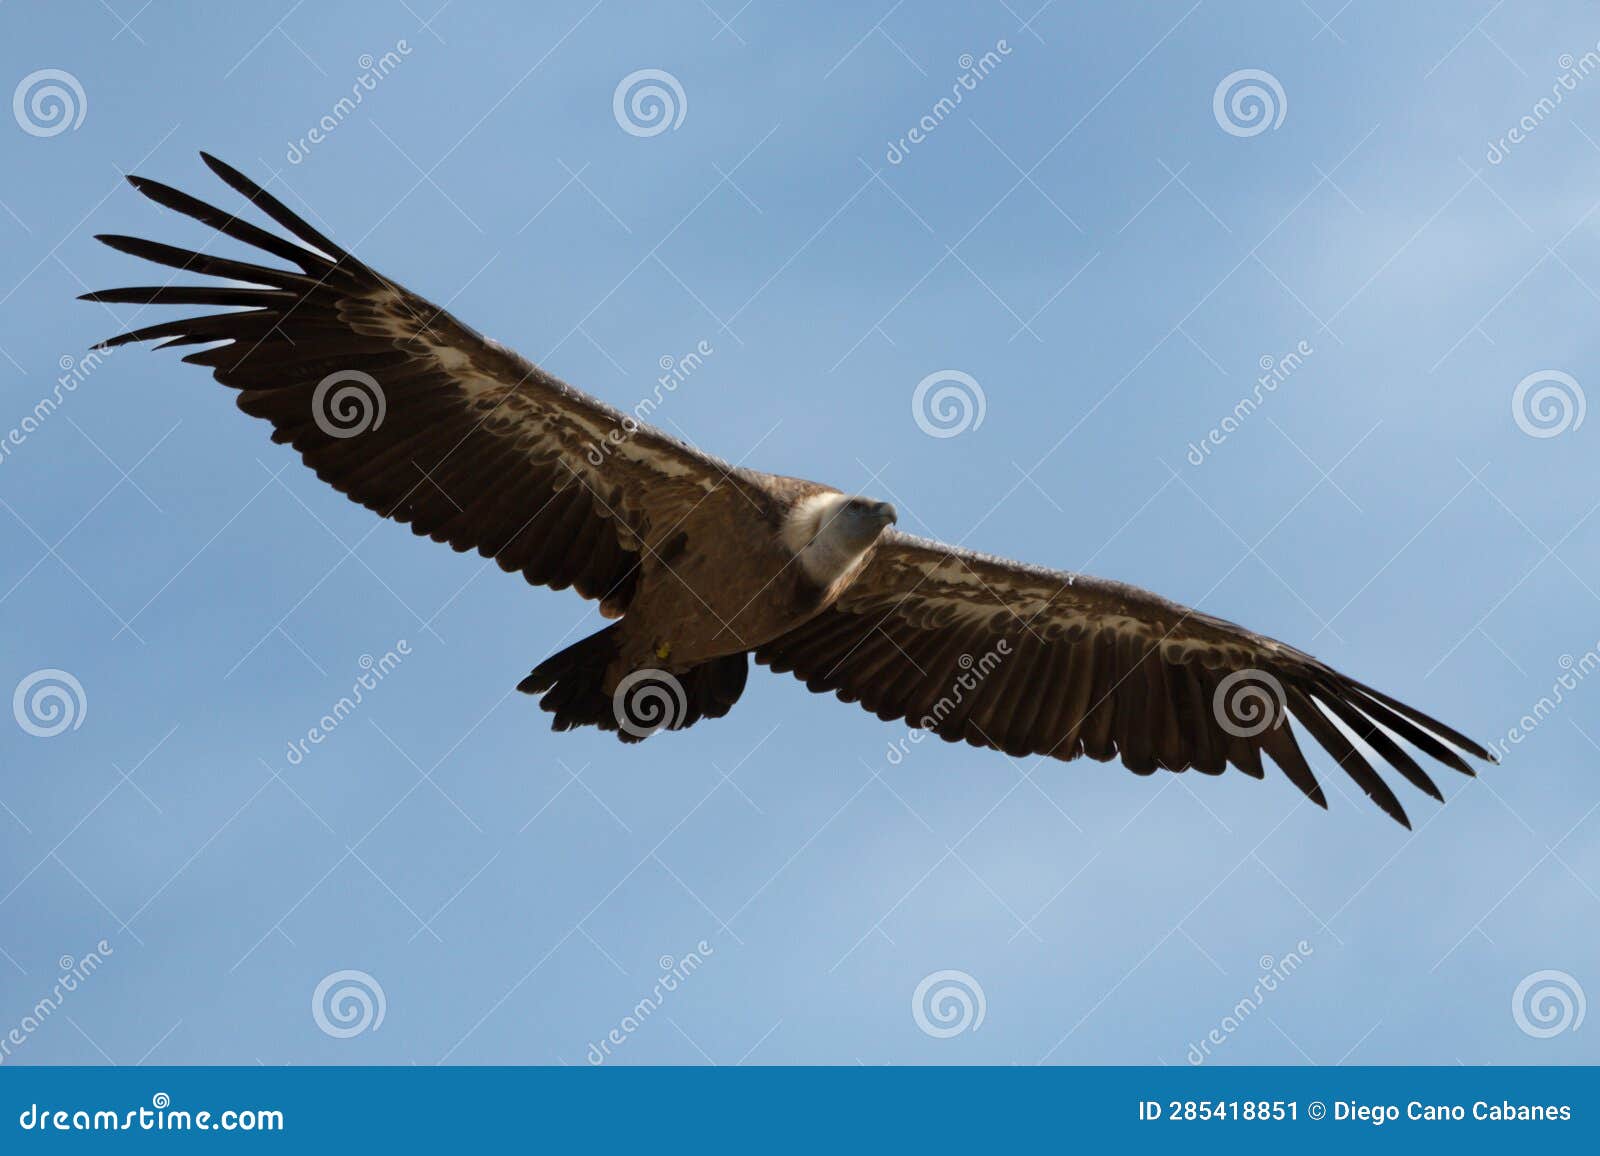 gyps fulvus flying with sky background with clouds in alcoy,